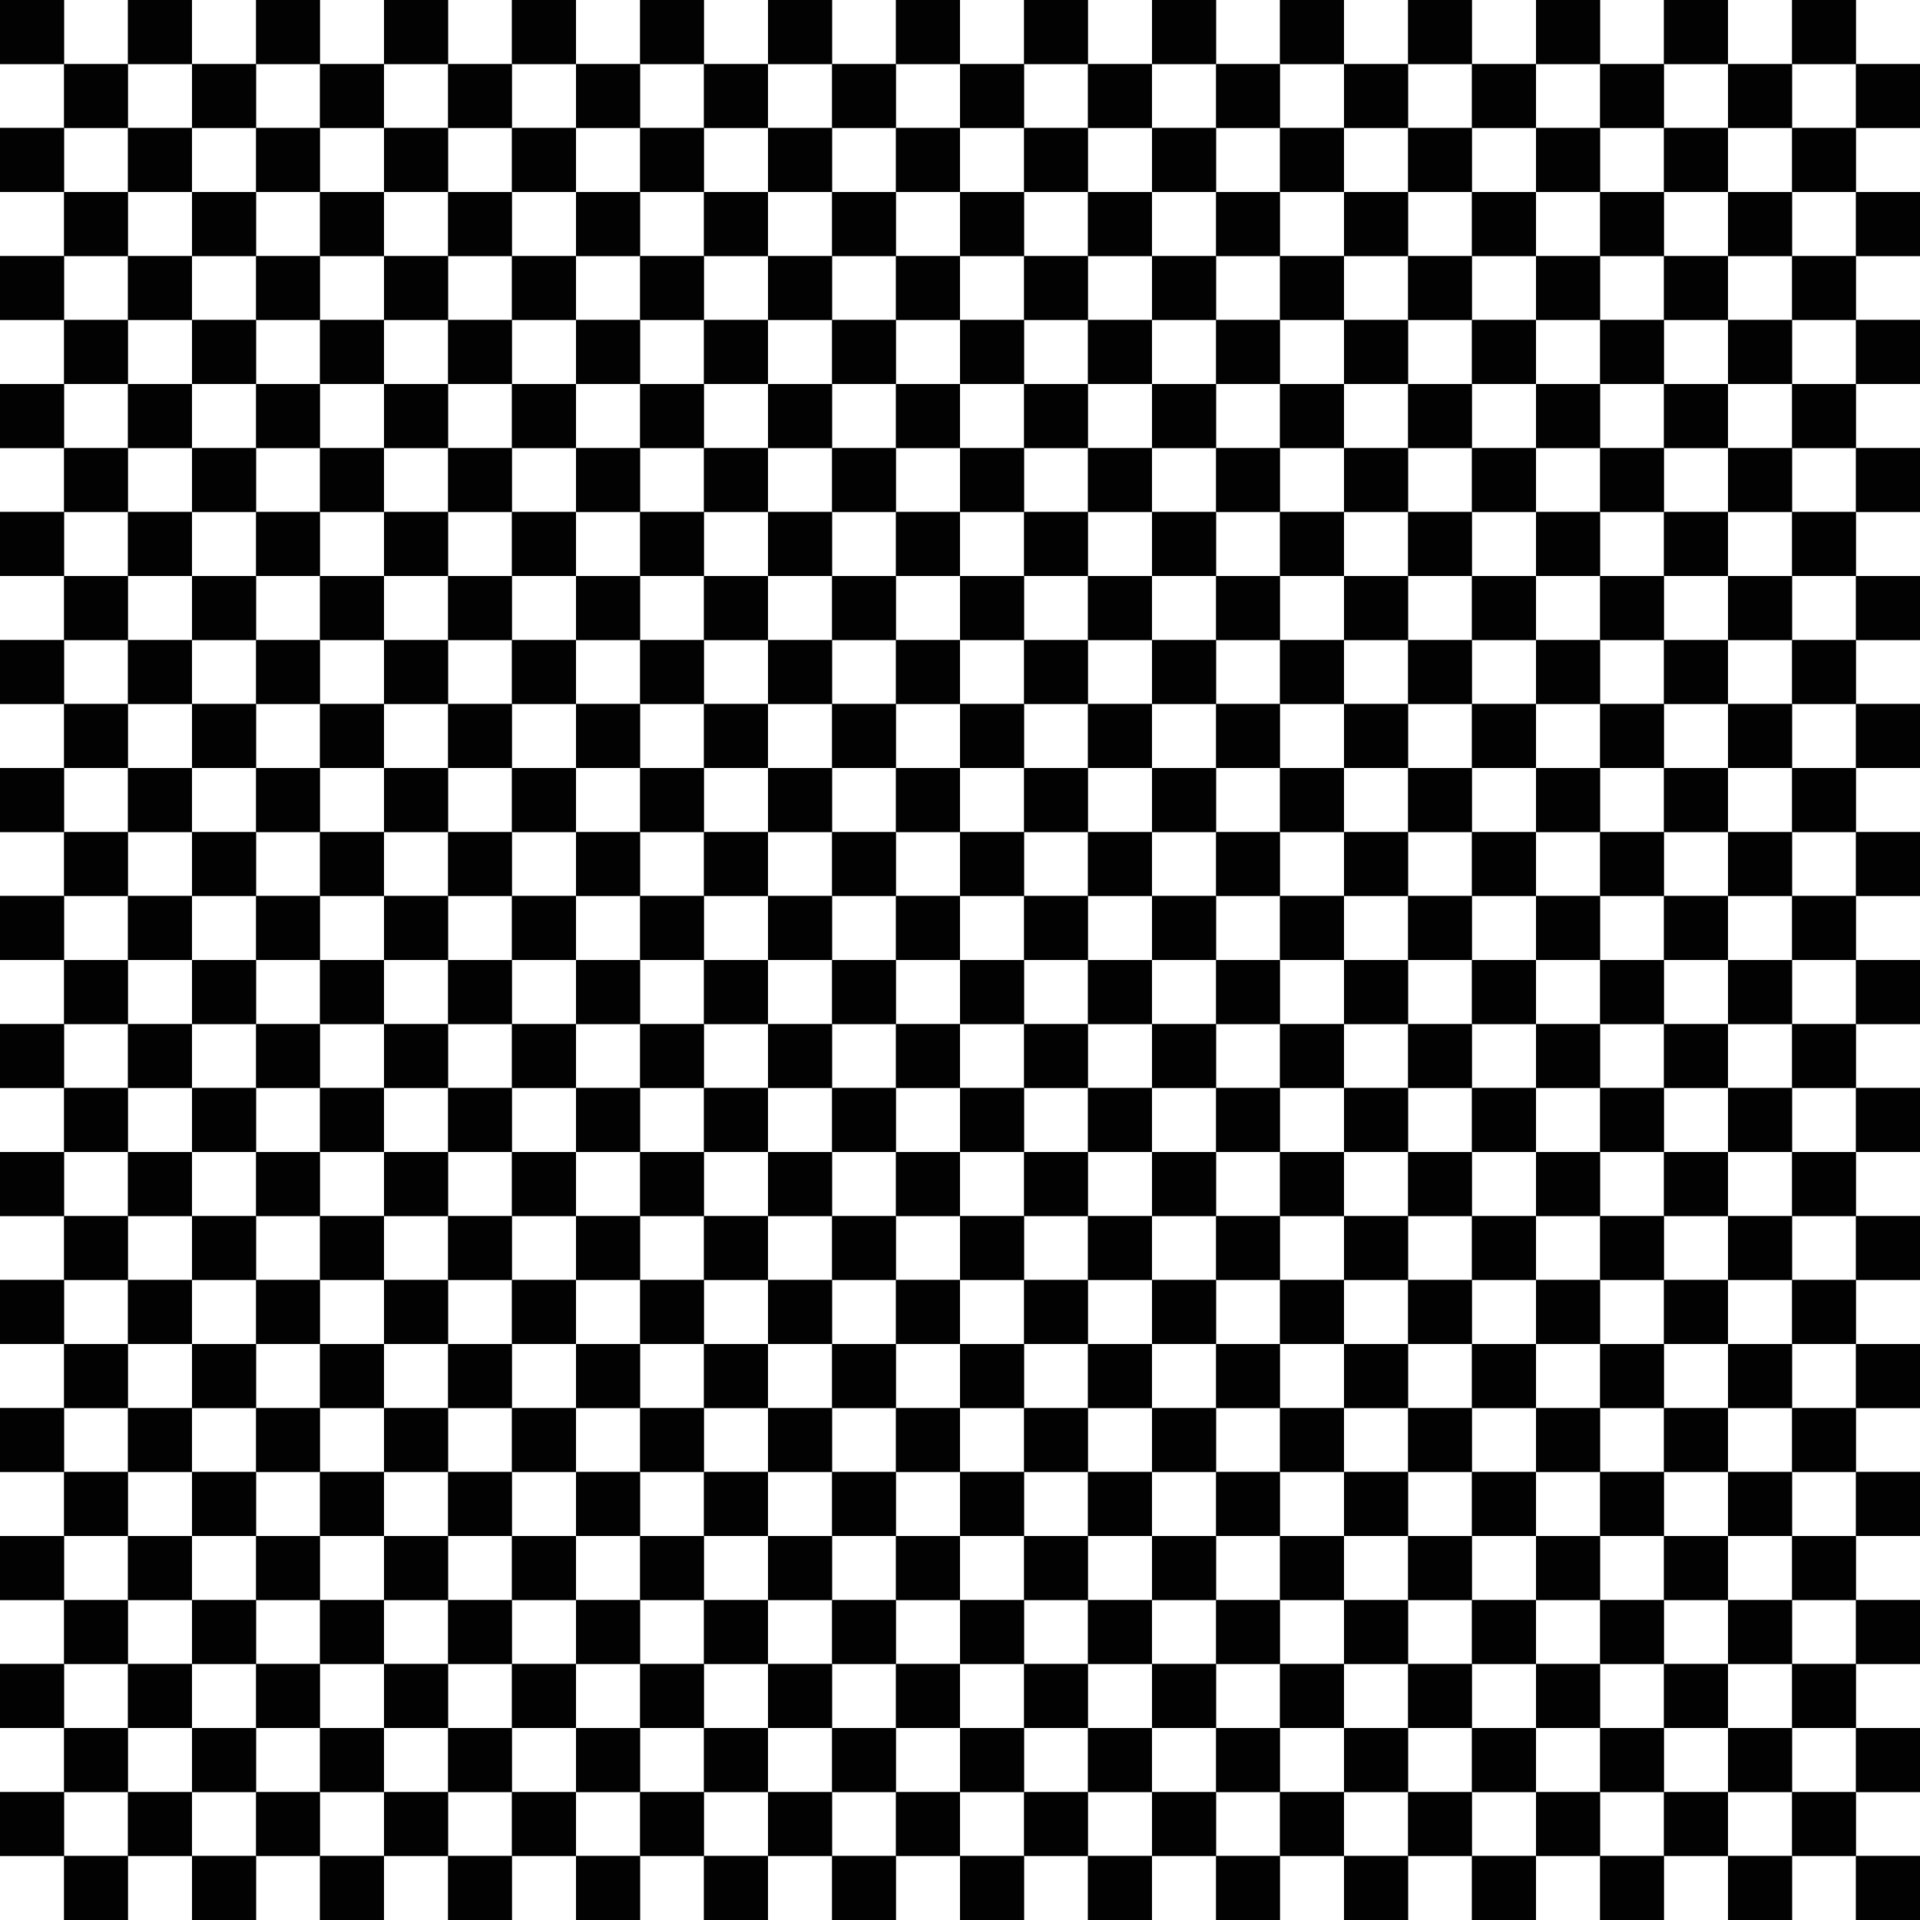 Checker black and white square grid pattern for background 25868347 ...